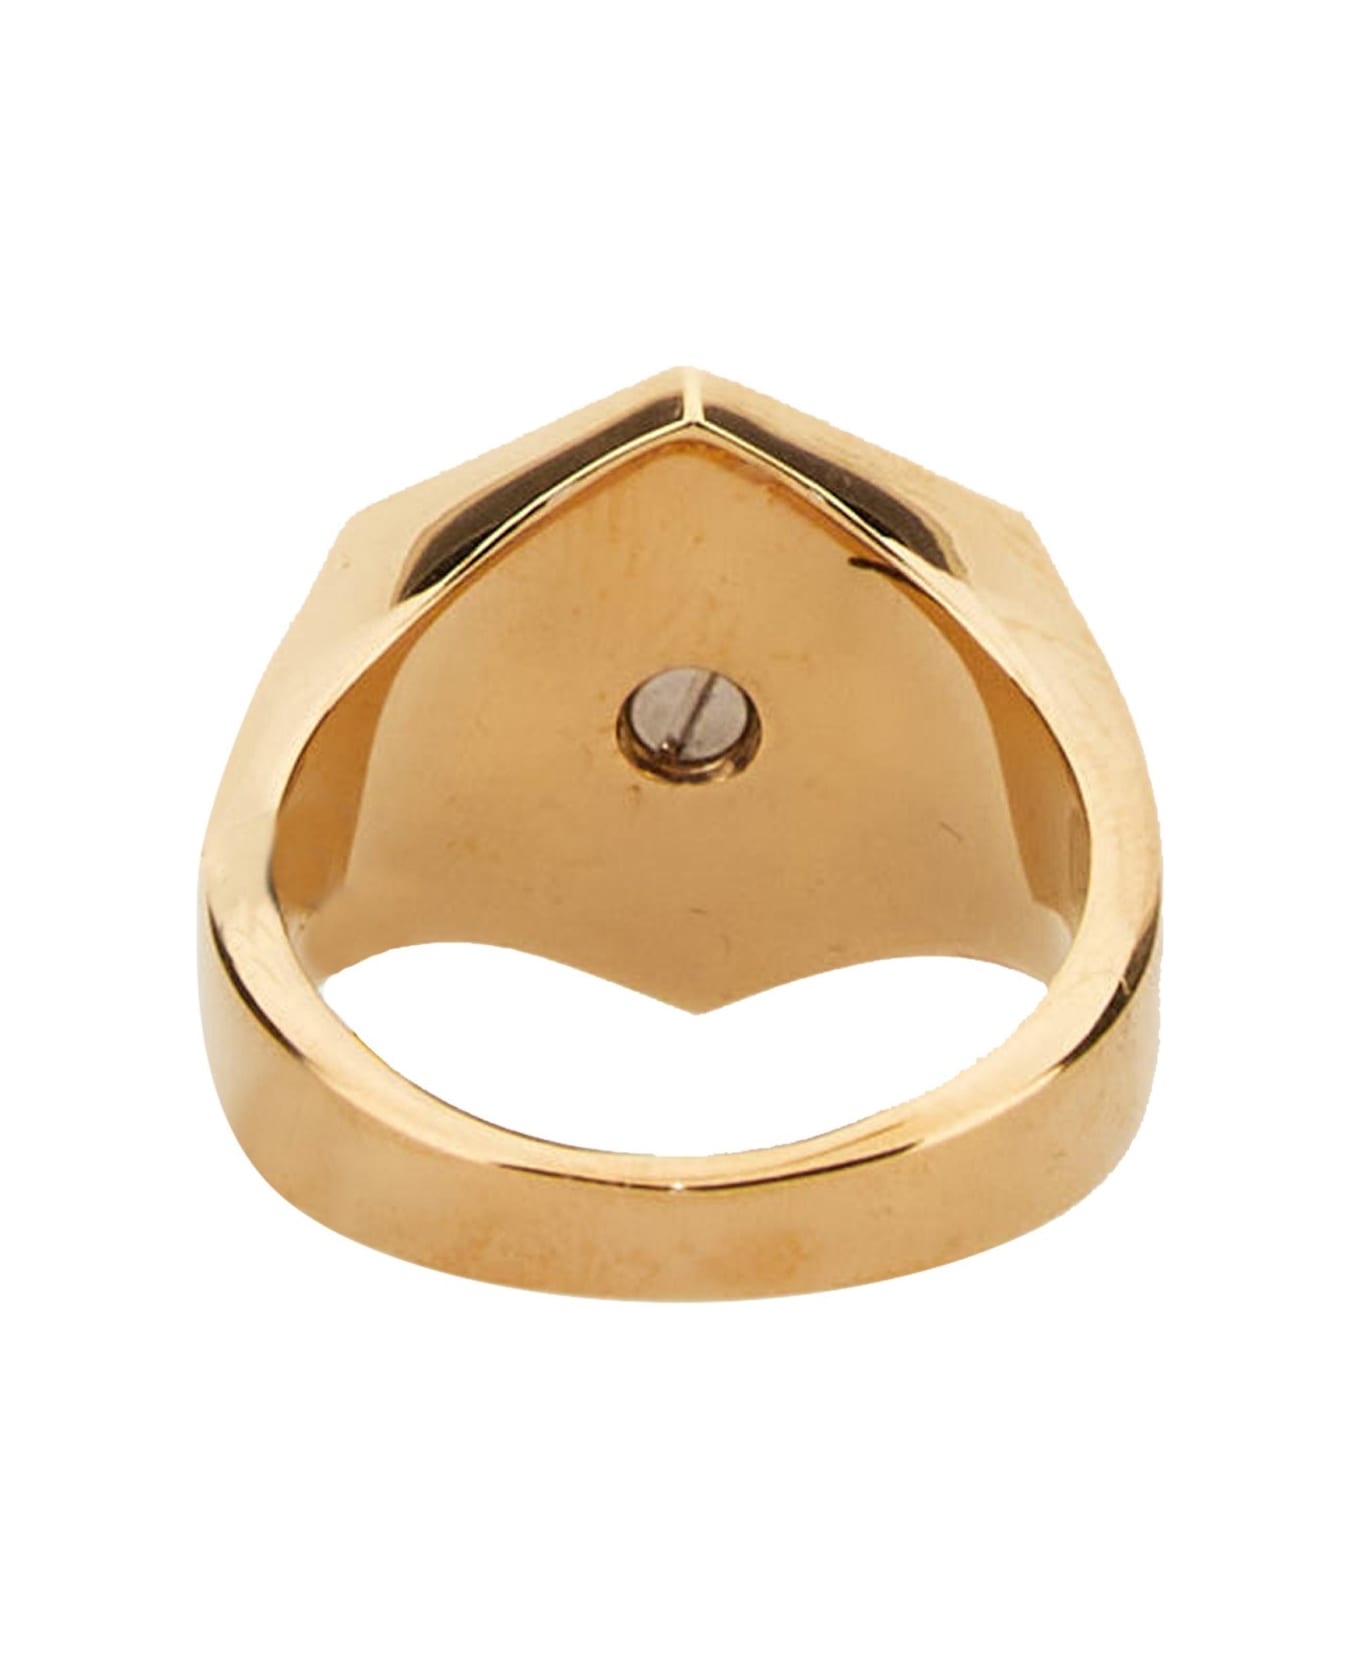 Versace Nuts & Bolts Jellyfish Ring - ORO リング